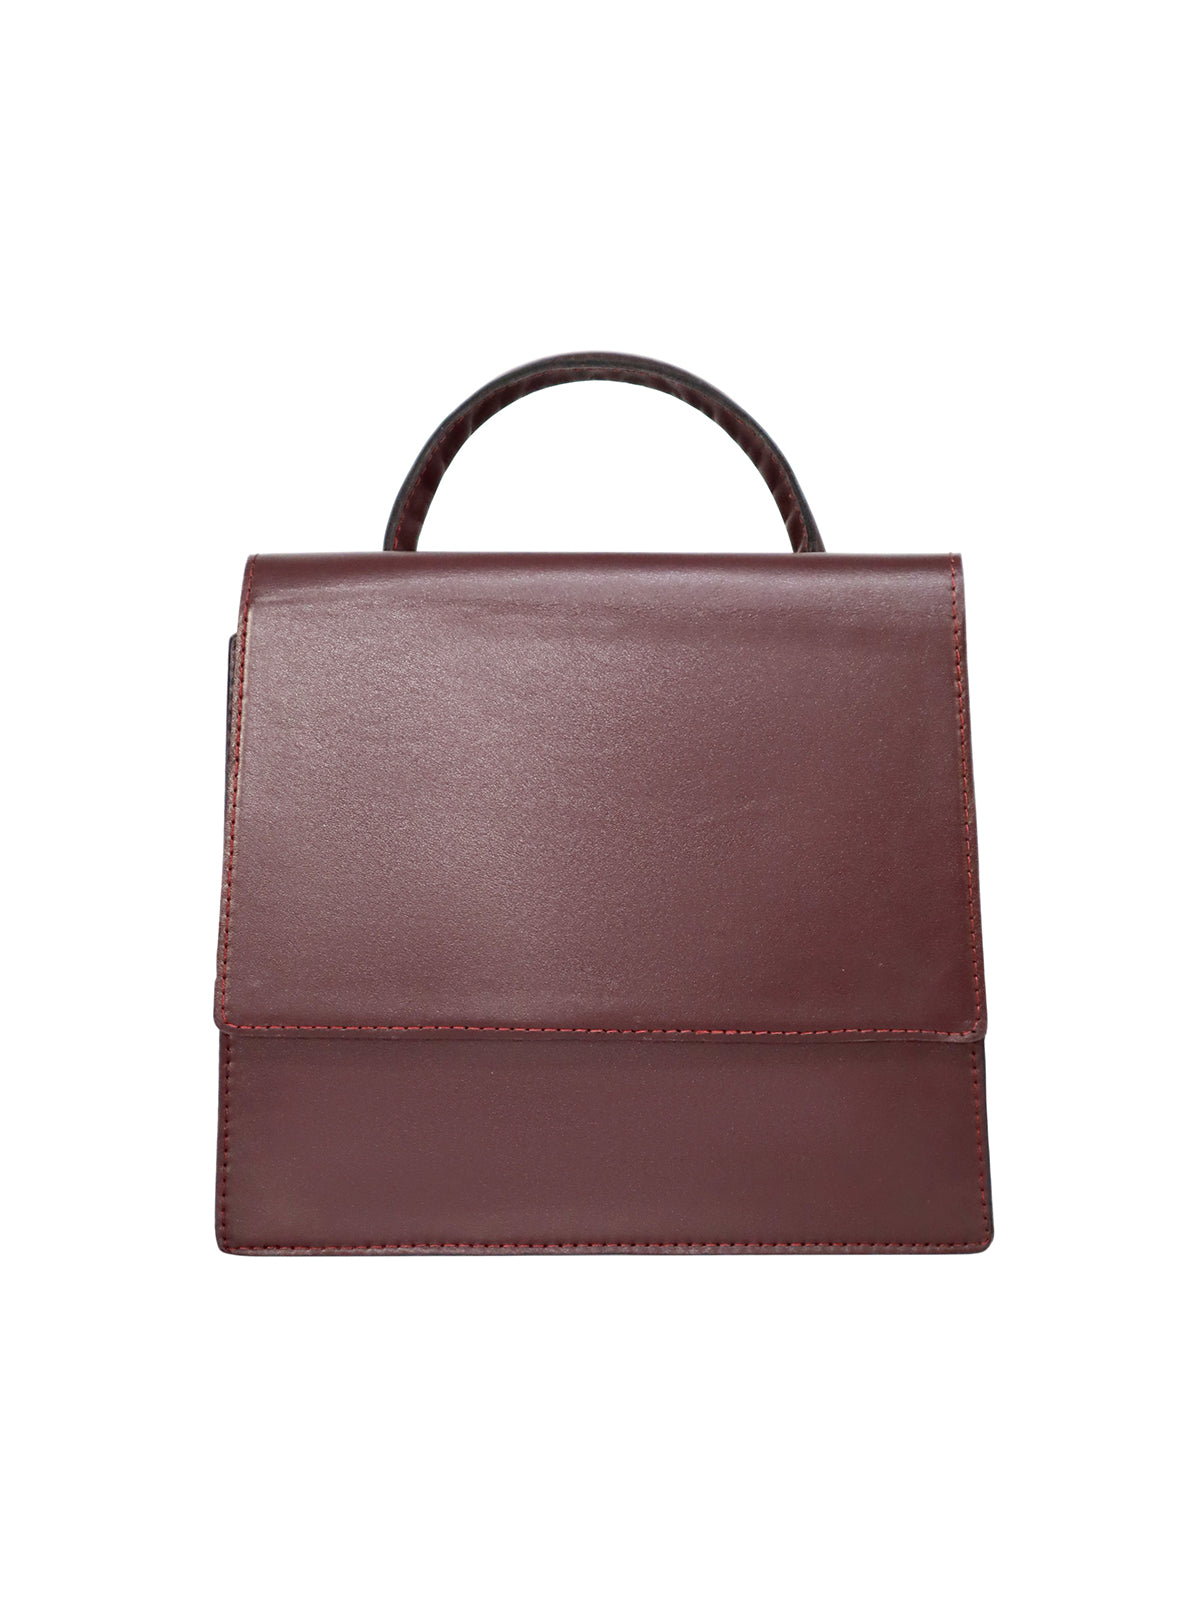 Crossbody Leather Bag - Burgundy front view